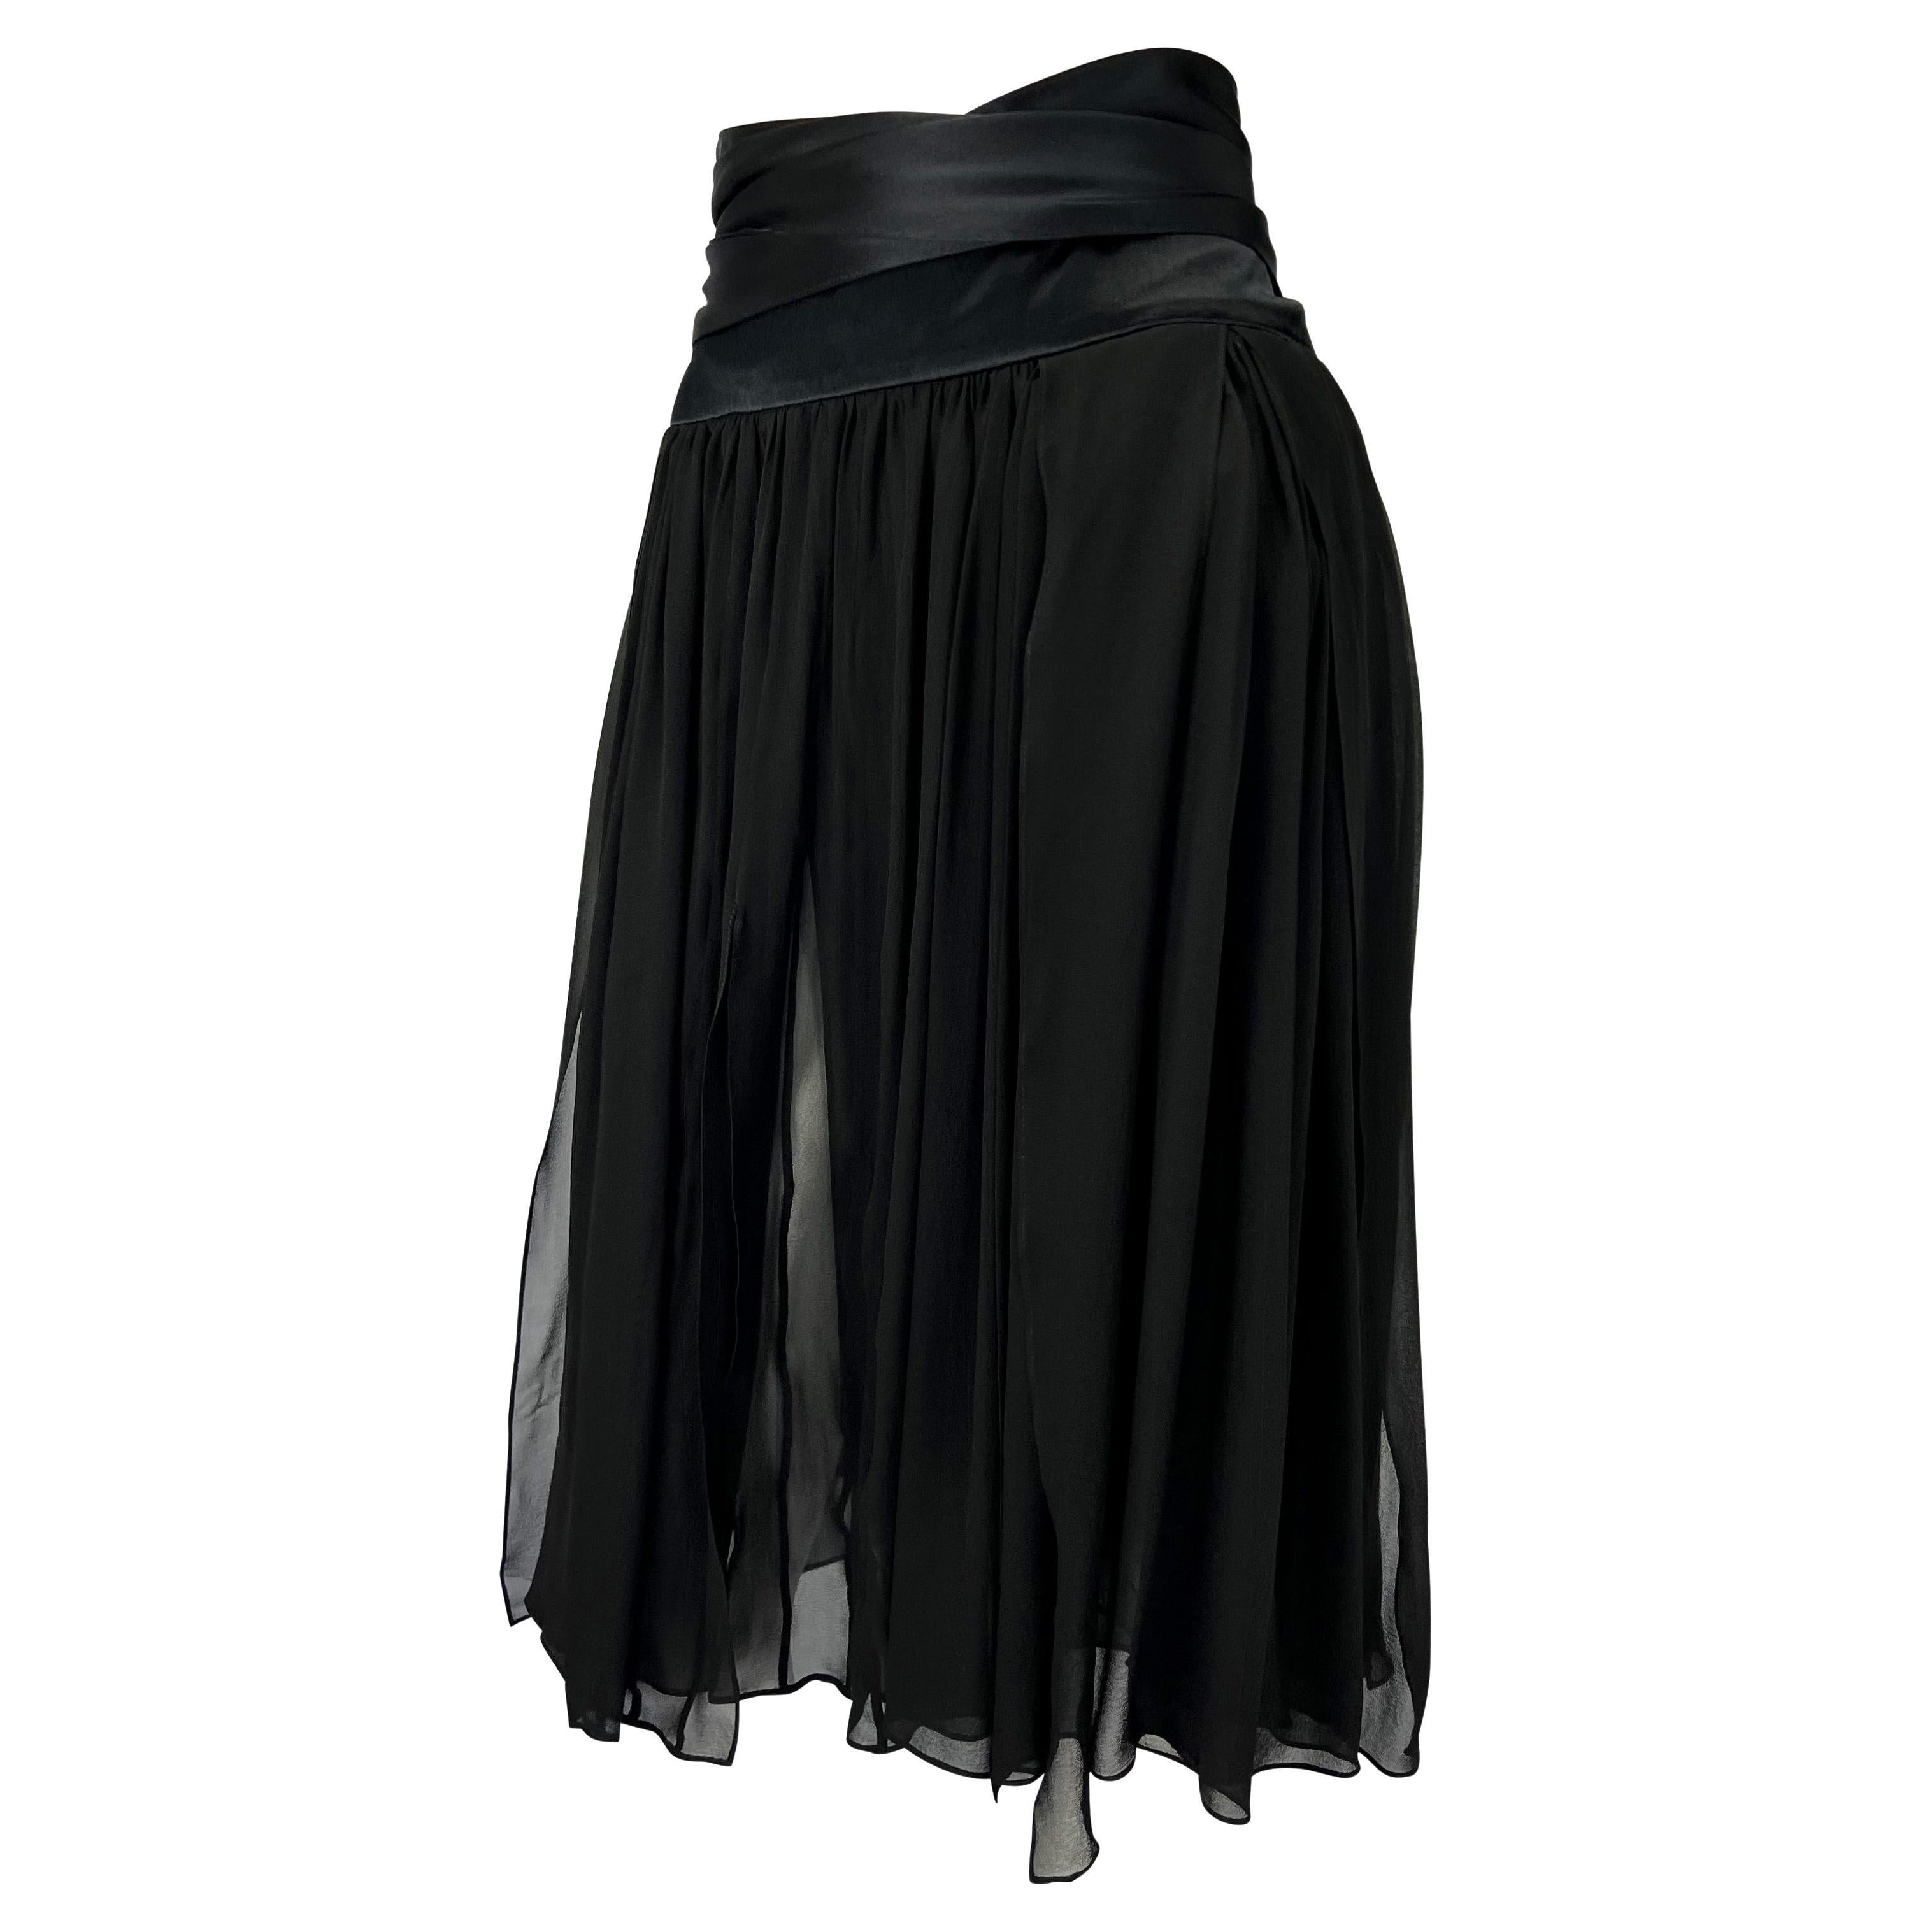 S/S 2004 Yves Saint Laurent by Tom Ford Black Pleated Silk Flare Skirt NWT 1